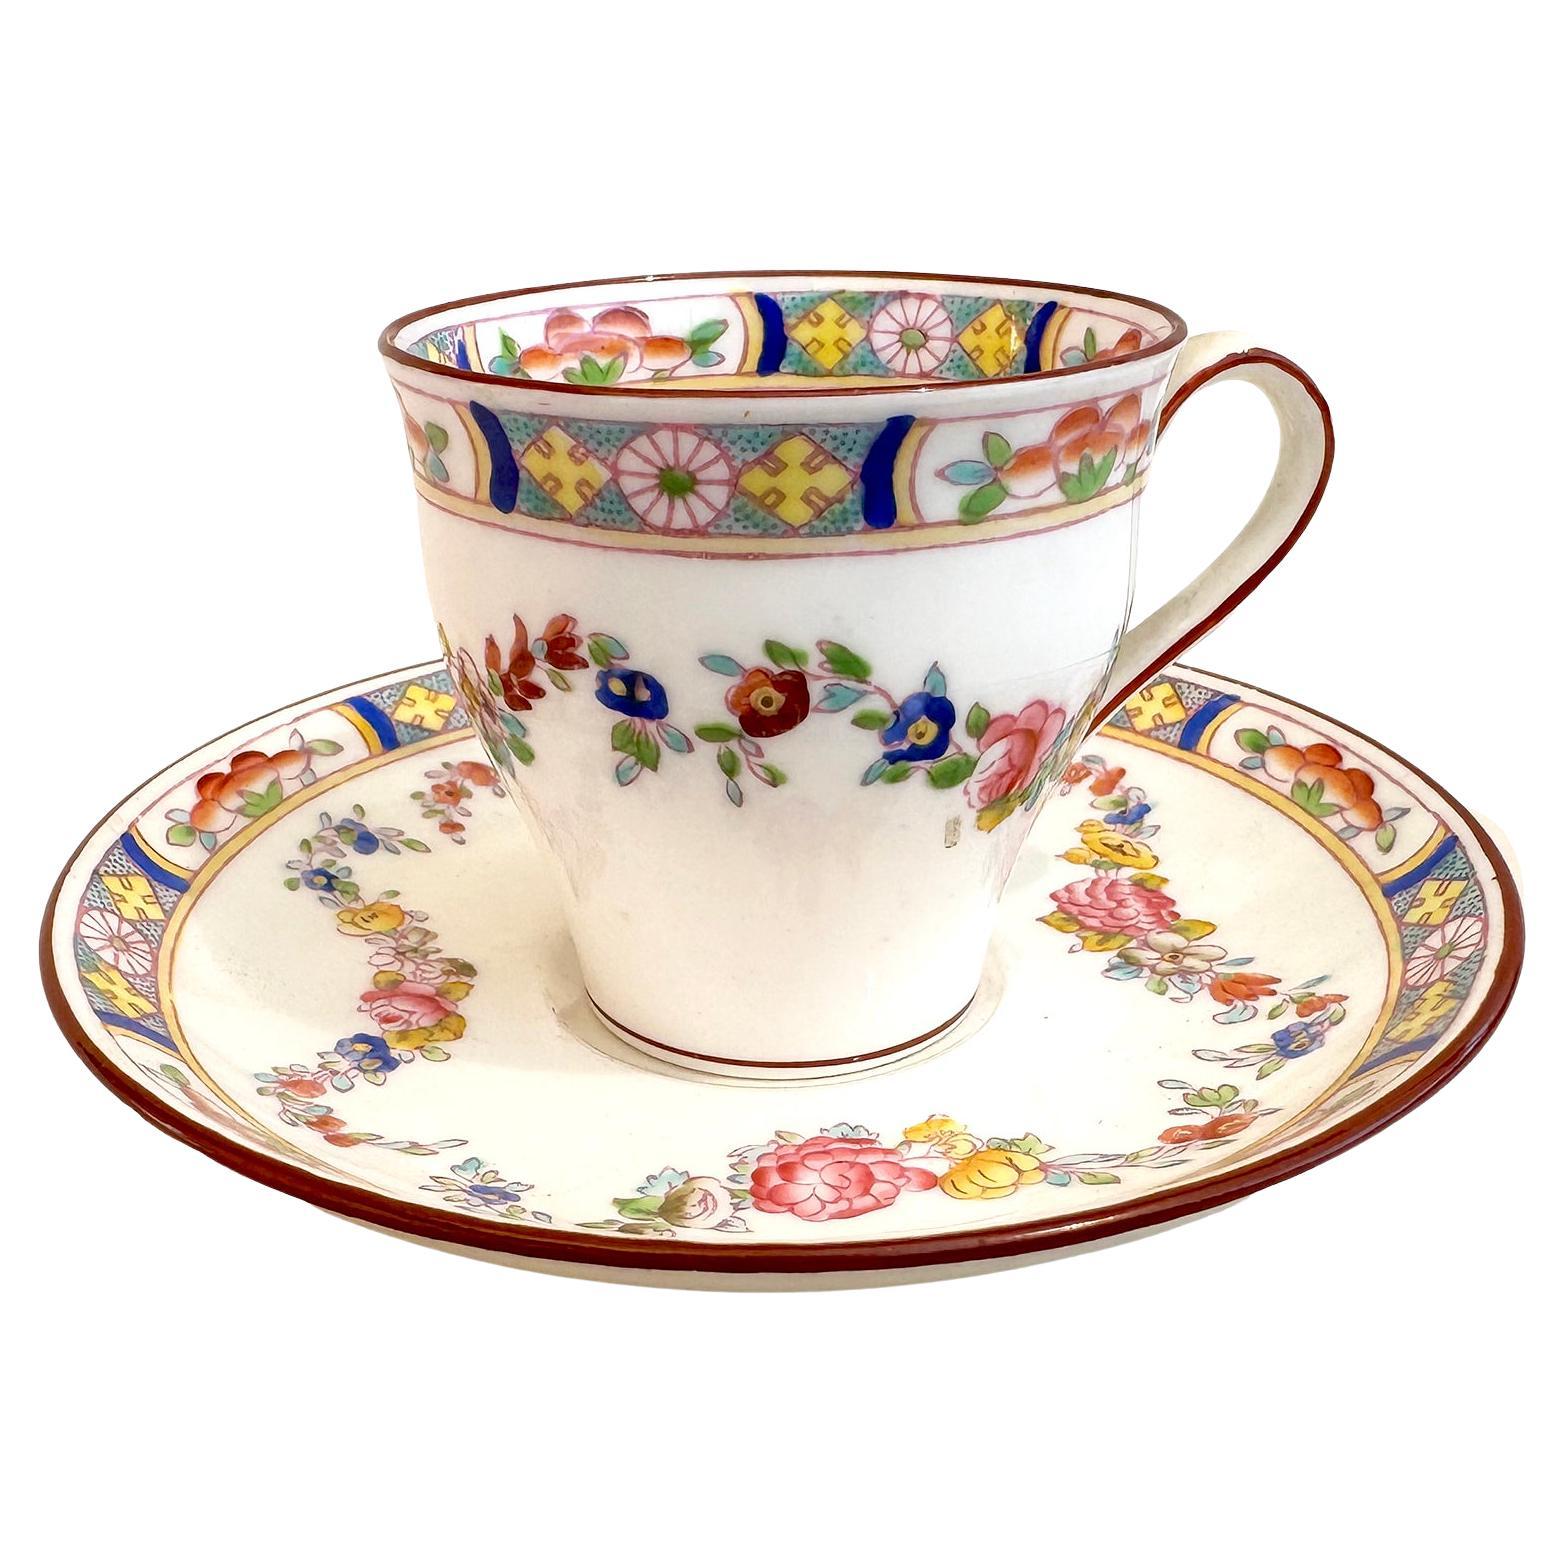 A Set of 5 English Hand-Decorated Minton Fine China Espresso Cups with Saucers For Sale